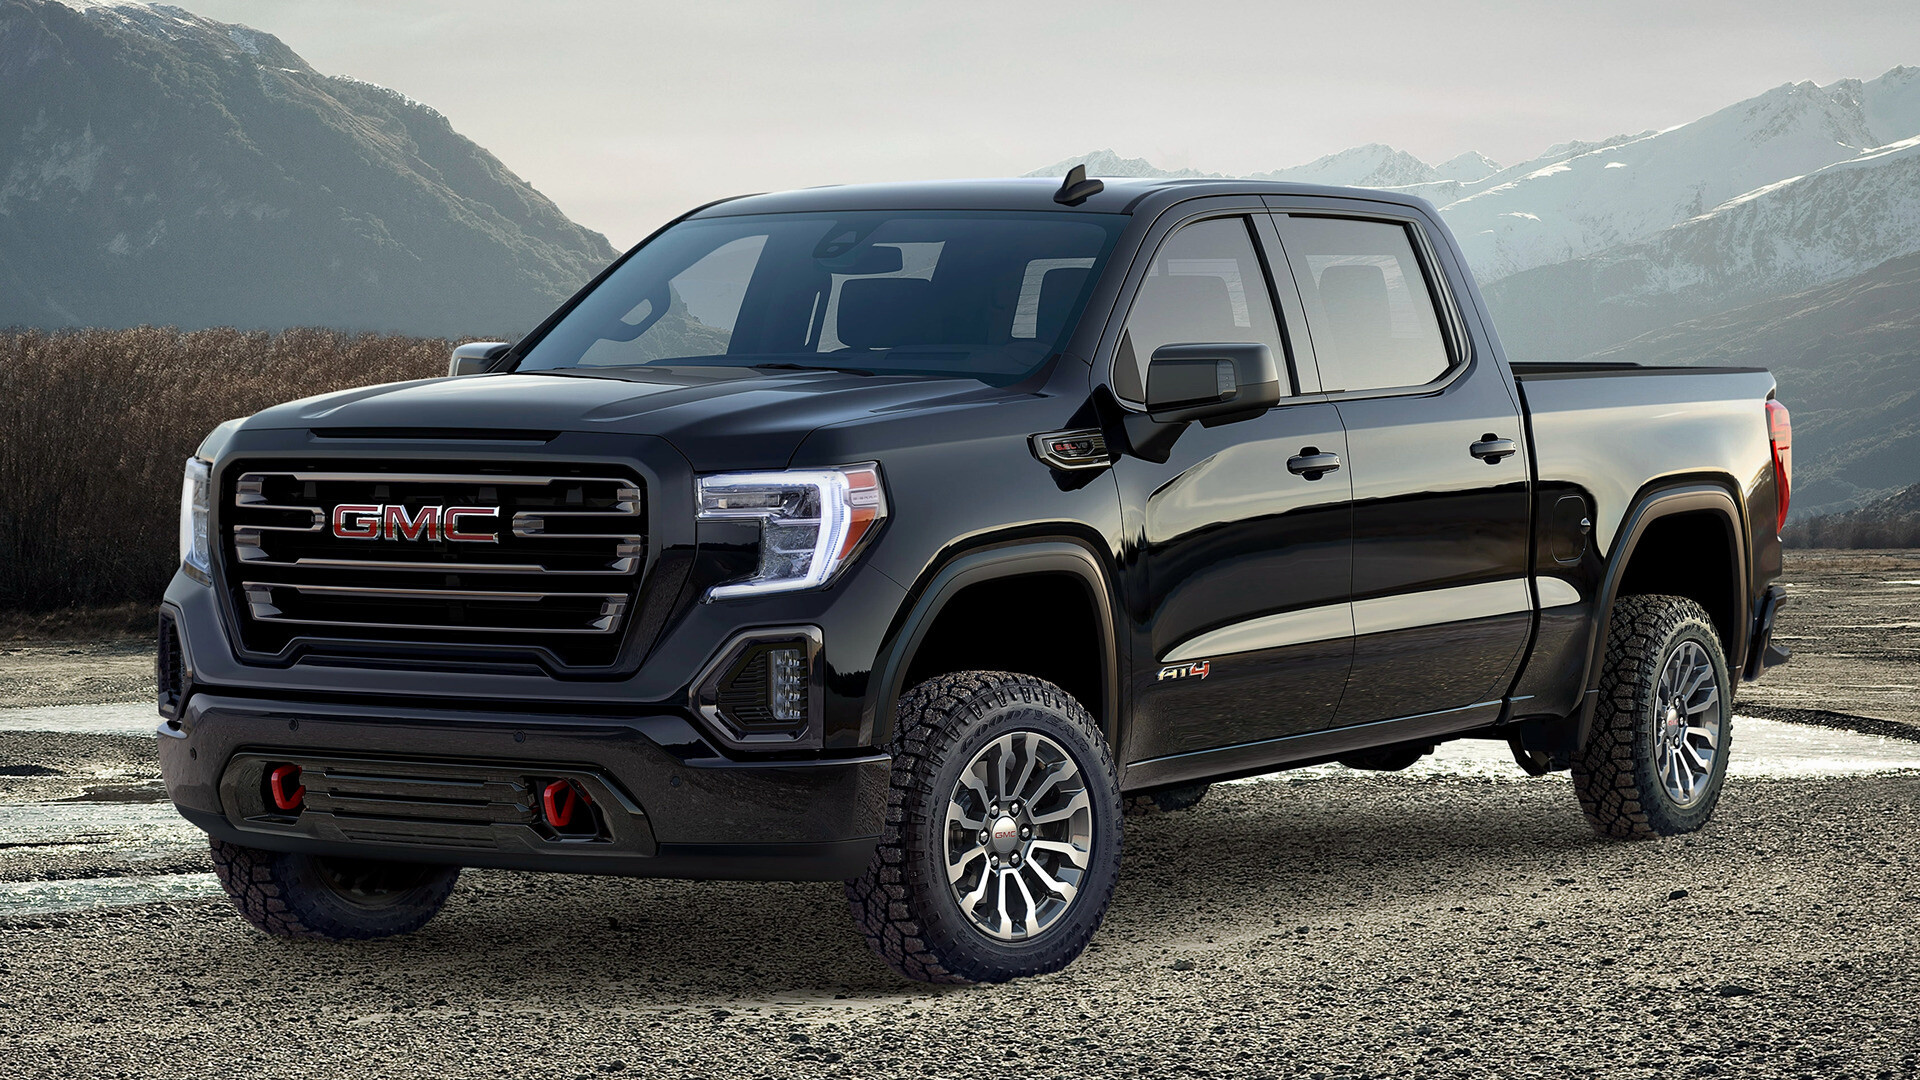 GMC Sierra: AT4 Crew Cab, Standard 4WD with a two-speed transfer case, 18-inch wheels with all-terrain tires. 1920x1080 Full HD Background.